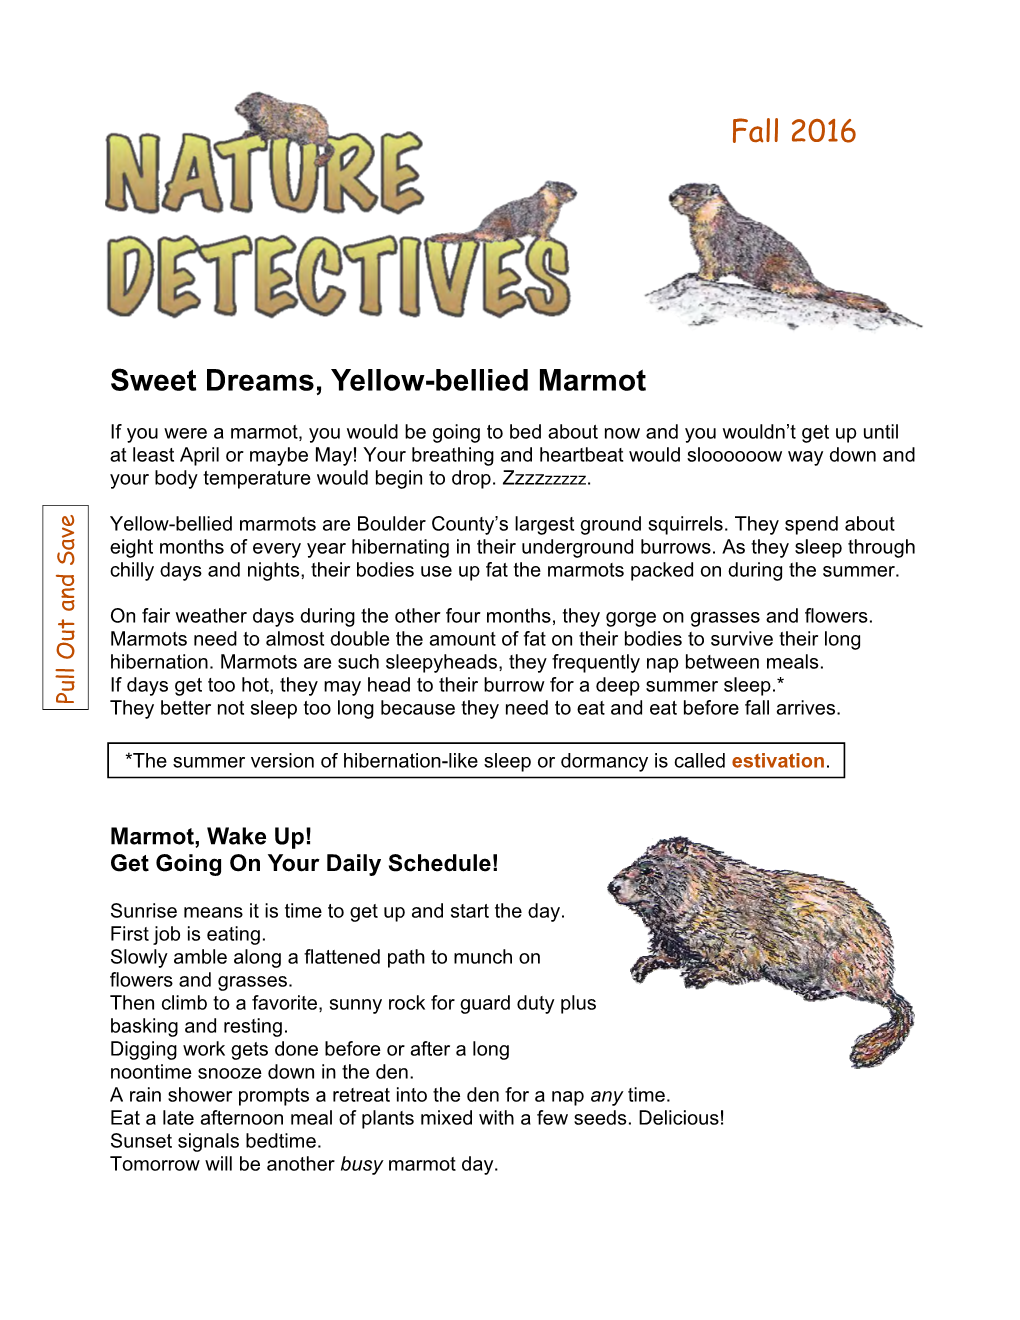 Nature Detectives: Sweet Dreams, Yellow-Bellied Marmot